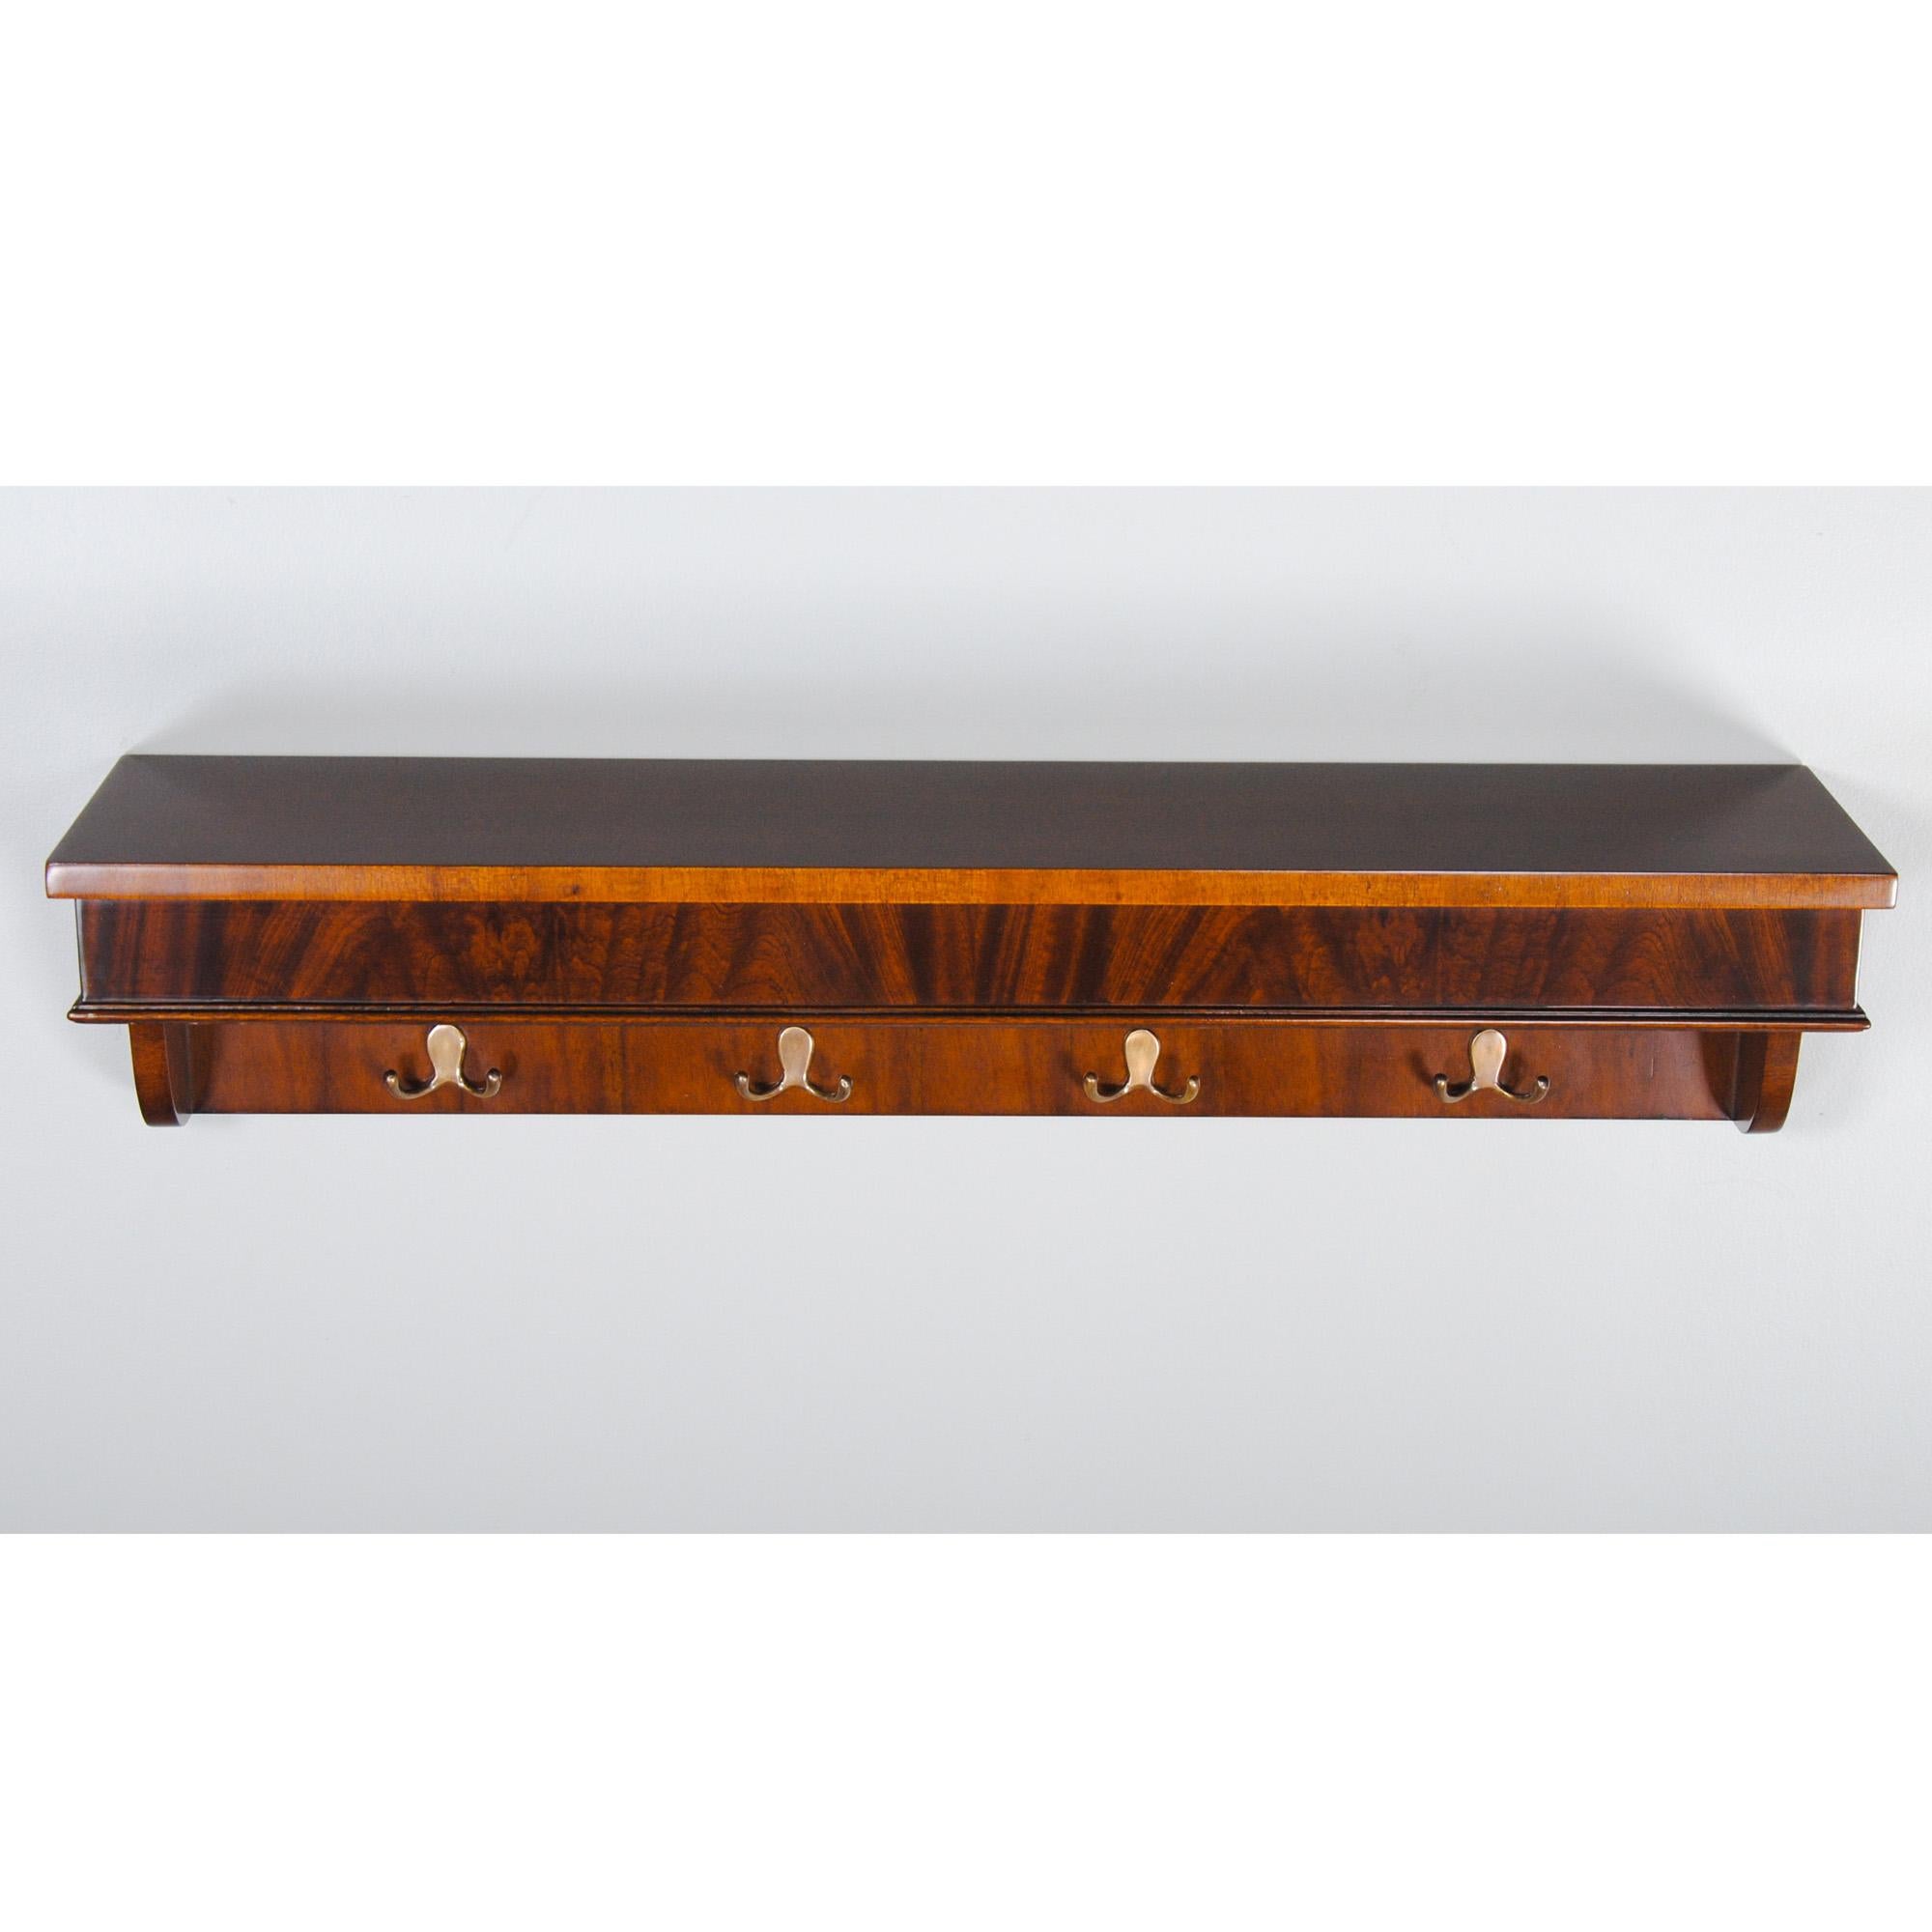 The Mahogany Coat Rack Shelf by Niagara Furniture is a great accessory that is both useful and decorative. Created from the finest mahogany solids and veneers the overall shape and style of the piece will fit in with almost any decor and add a